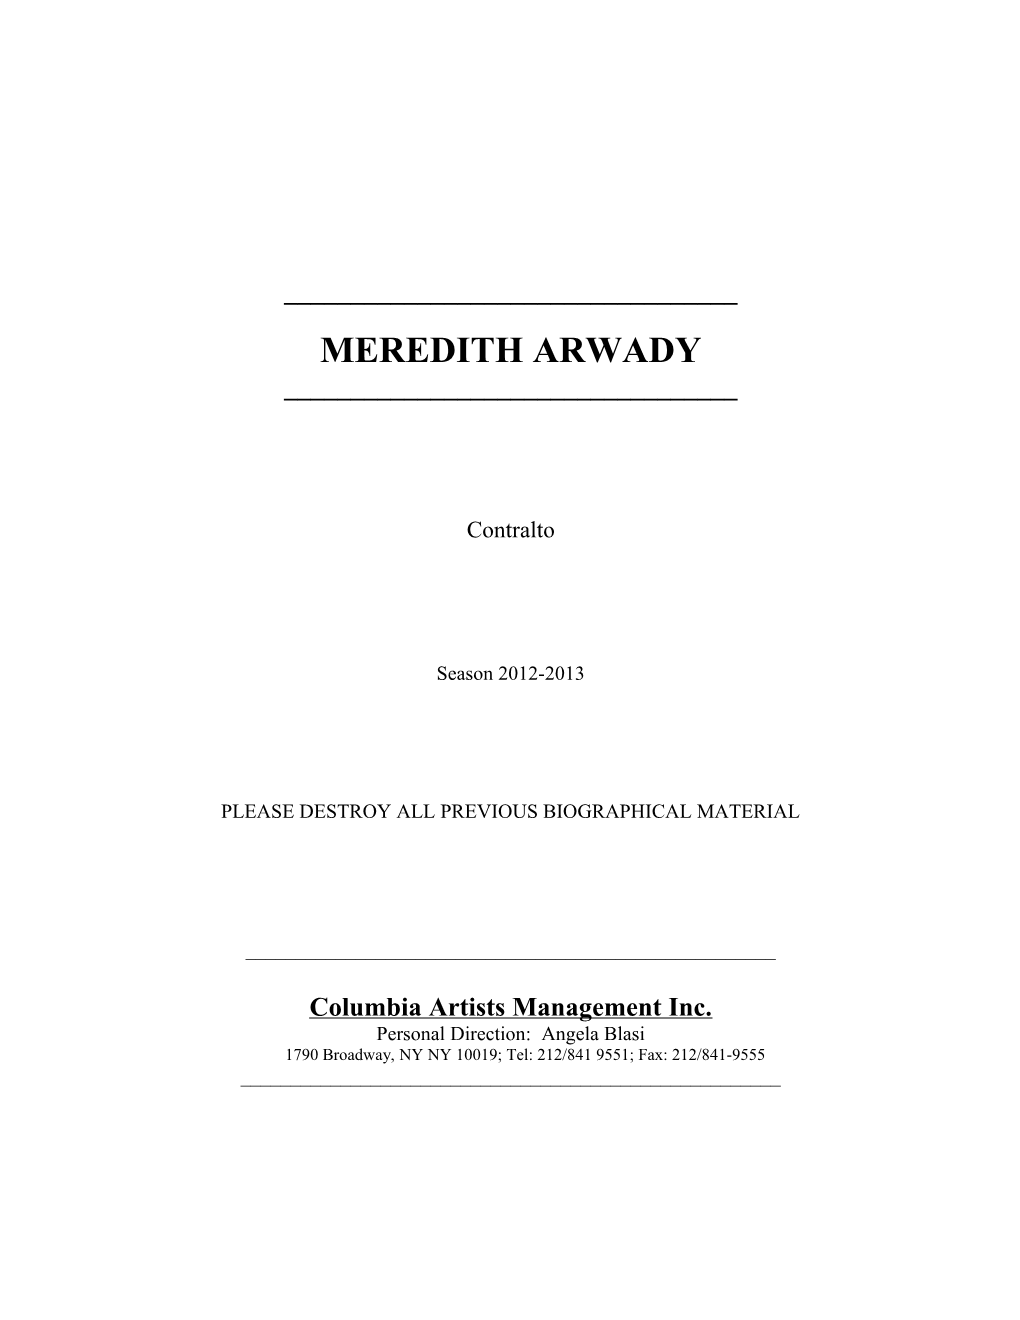 A Winner of the 2004 Metropolitan Opera National Council Auditions, Contralto Meredith